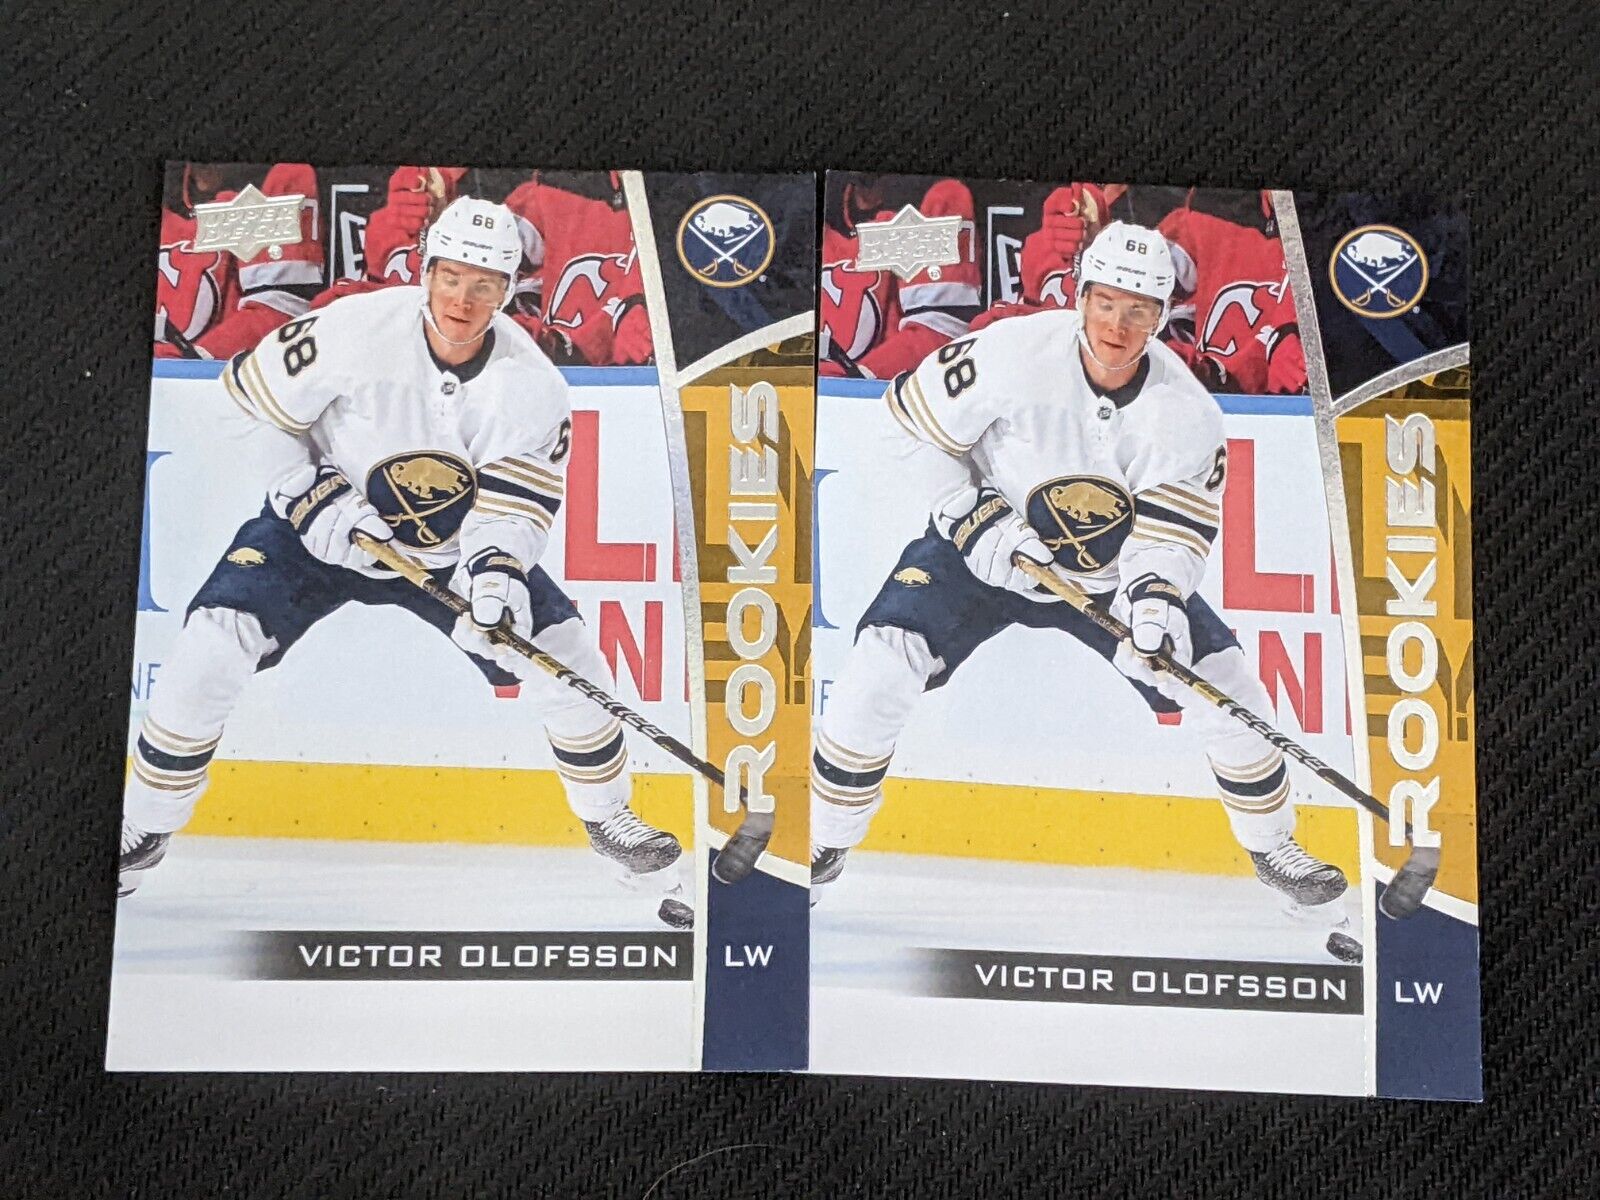 2019-20 UPPER DECK NHL ROOKIE BOX SET VICTOR OLOFSSON #17 ROOKIES RC 2 CARD LOT. rookie card picture